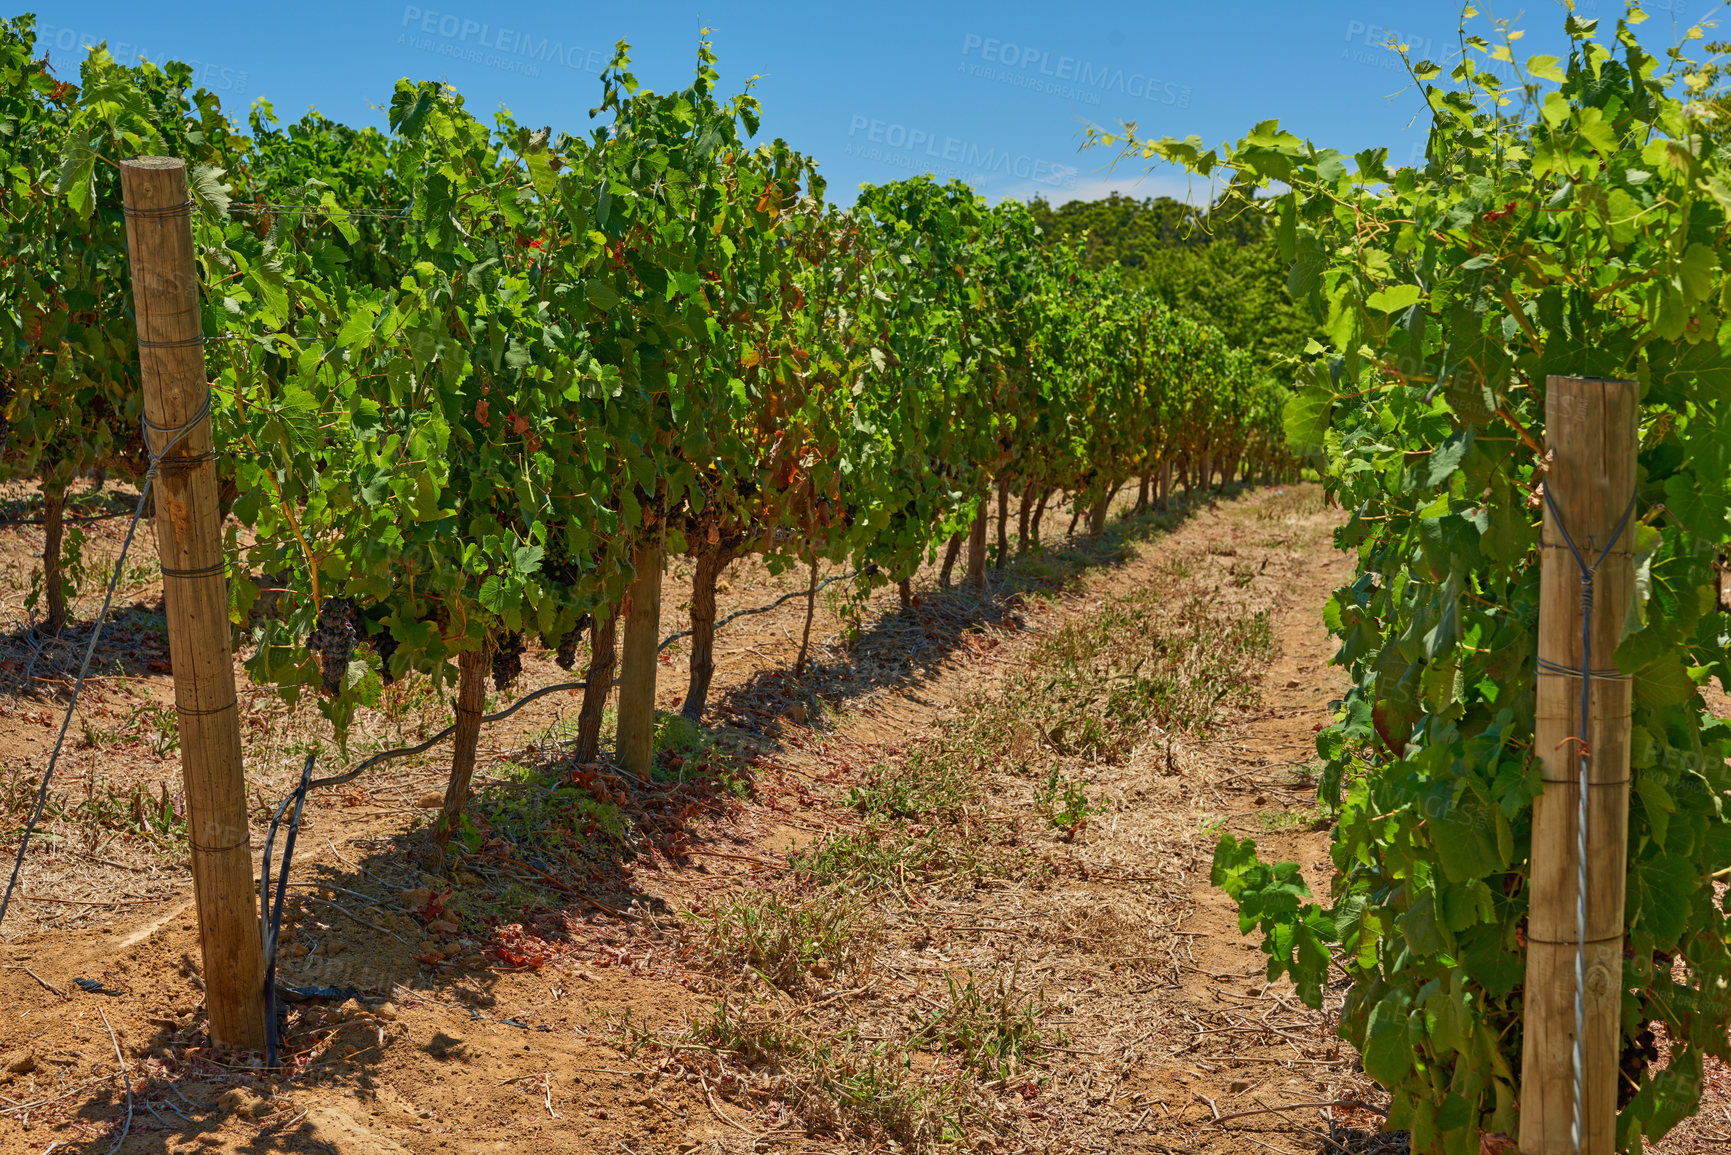 Buy stock photo Rows of grapes growing on green vines on a sunny day in a vineyard in Stellenbosch district, Western Cape Province, South Africa. Ripe fruit hanging low before being harvested for the wine industry 